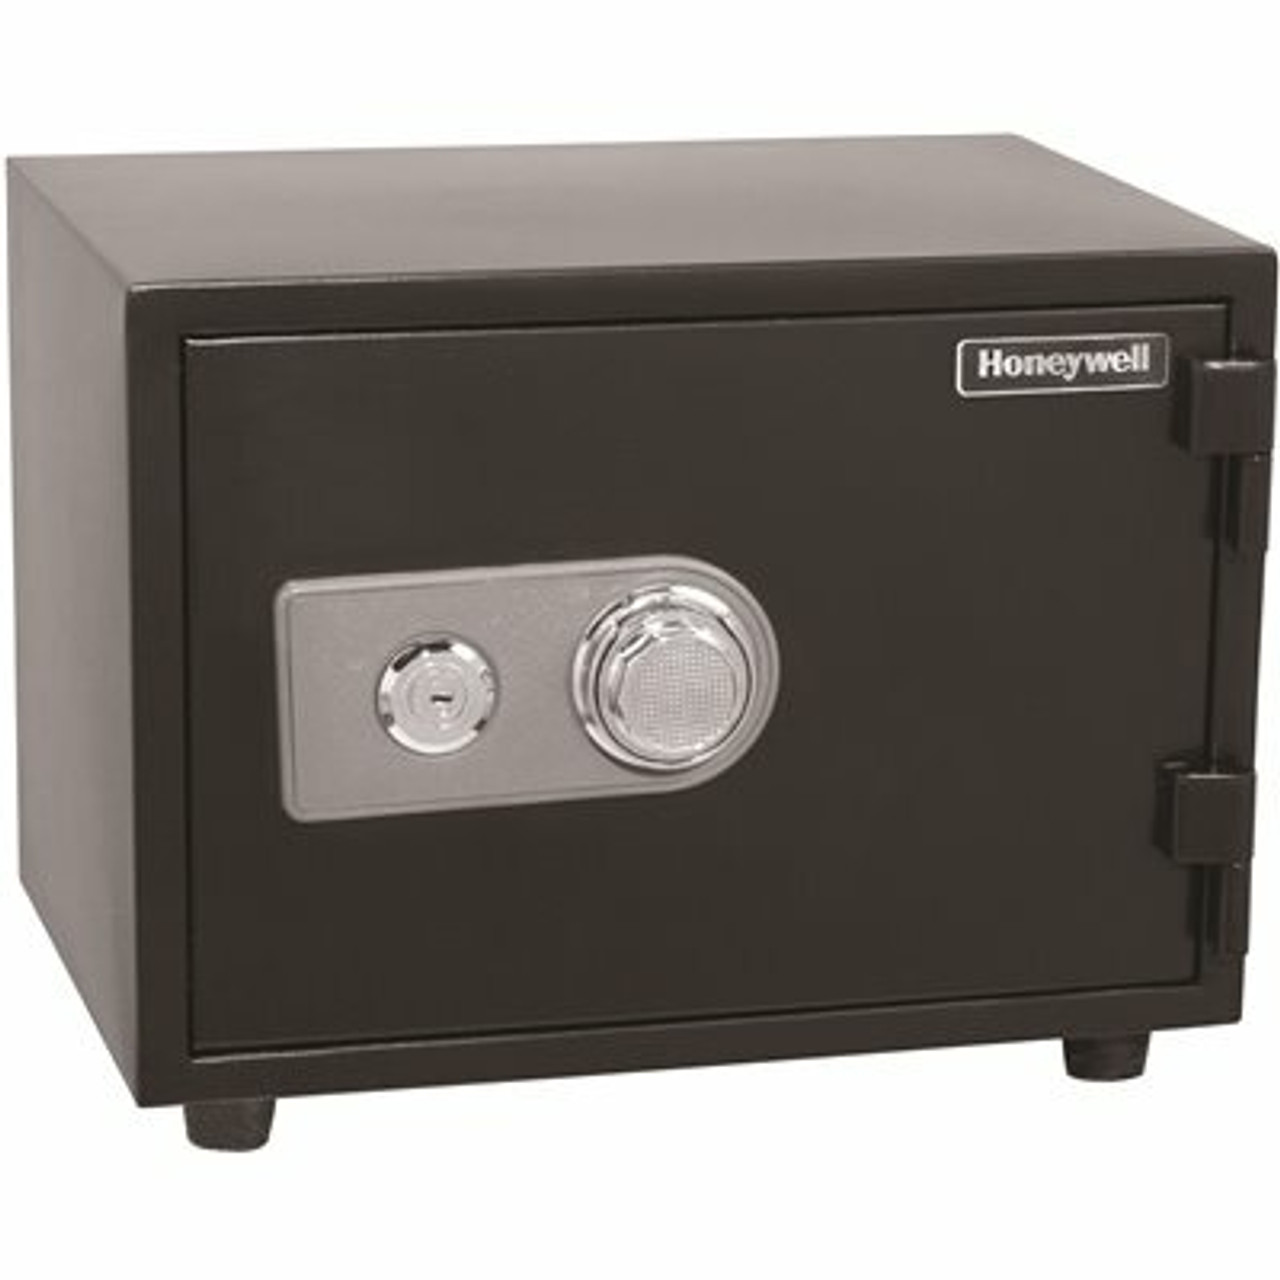 Honeywell 0.55 Cu. Ft. Fire Resistant Safe With Dual Combination And Key Lock Security